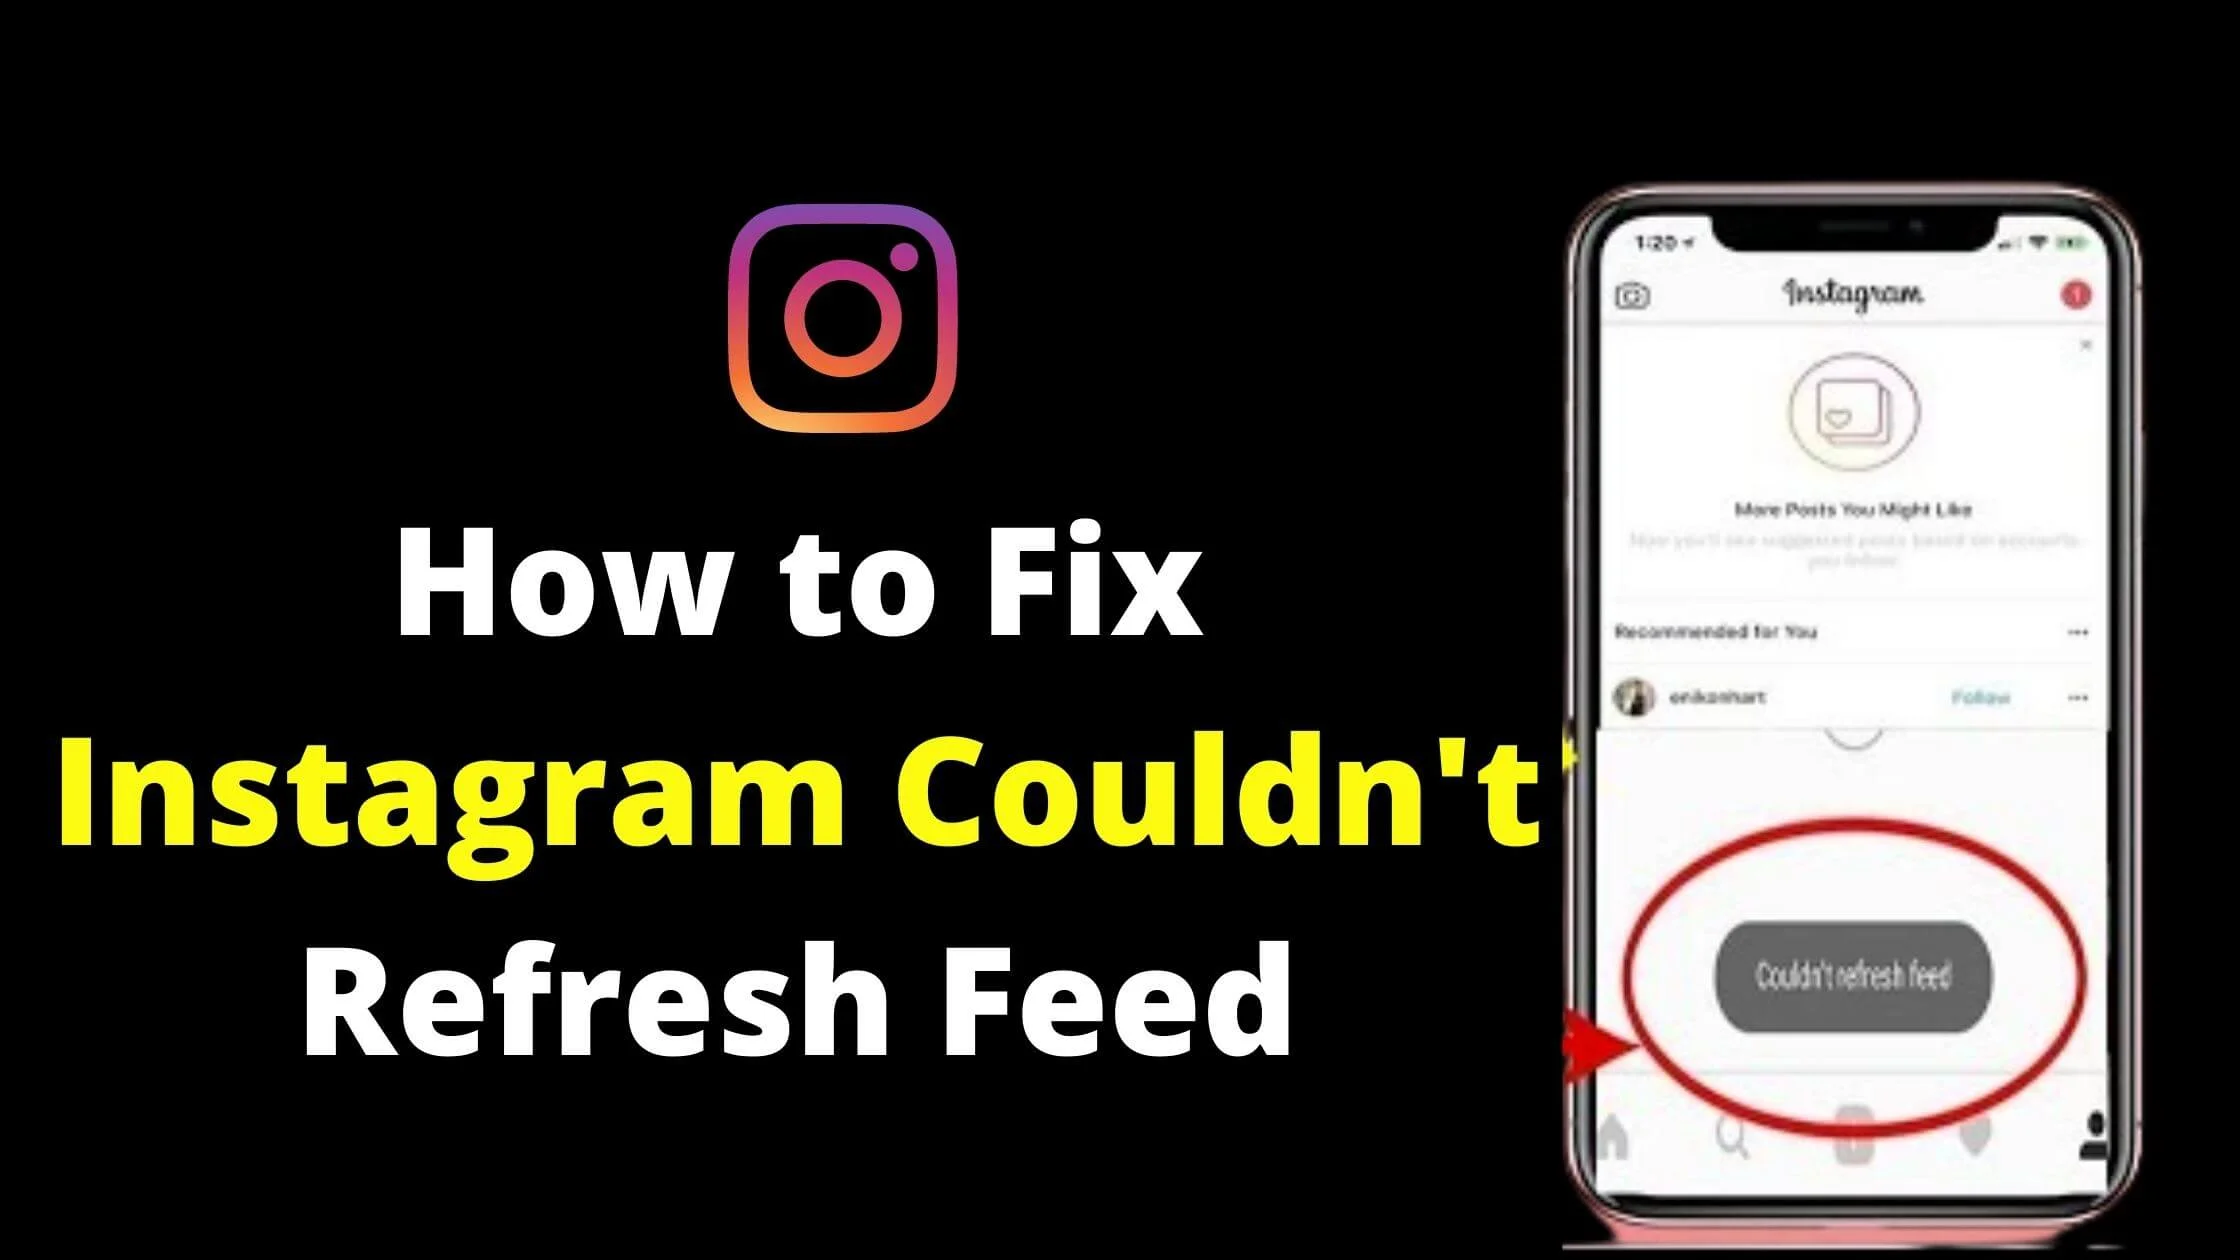 How to Fix Instagram Couldn't Refresh Feed